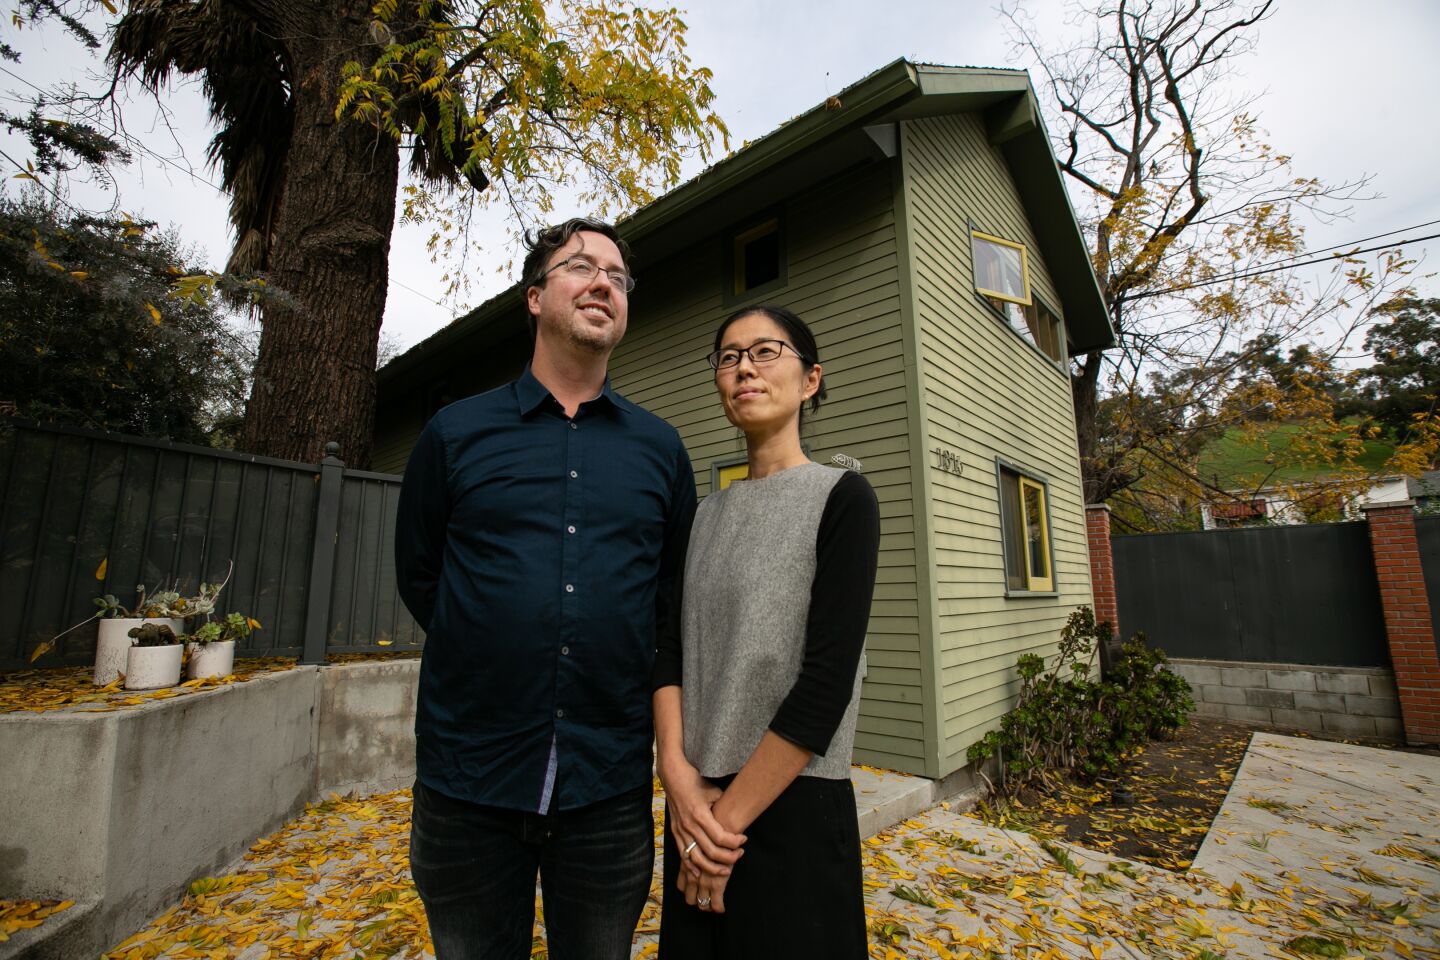 Los Angeles, CA., December 10, 2019: Bo Sundius, 44, and Hisako Ichiki, 44, owners of Bunch Design, a L.A. based husband and wife design firm stand for a portrait outside of one of their Accessory Dwelling Units (ADUs) on Tuesday, December 10, 2019. Bunch Design focuses on both custom and pre-designed ADU’s. (Jason Armond / Los Angeles Times)